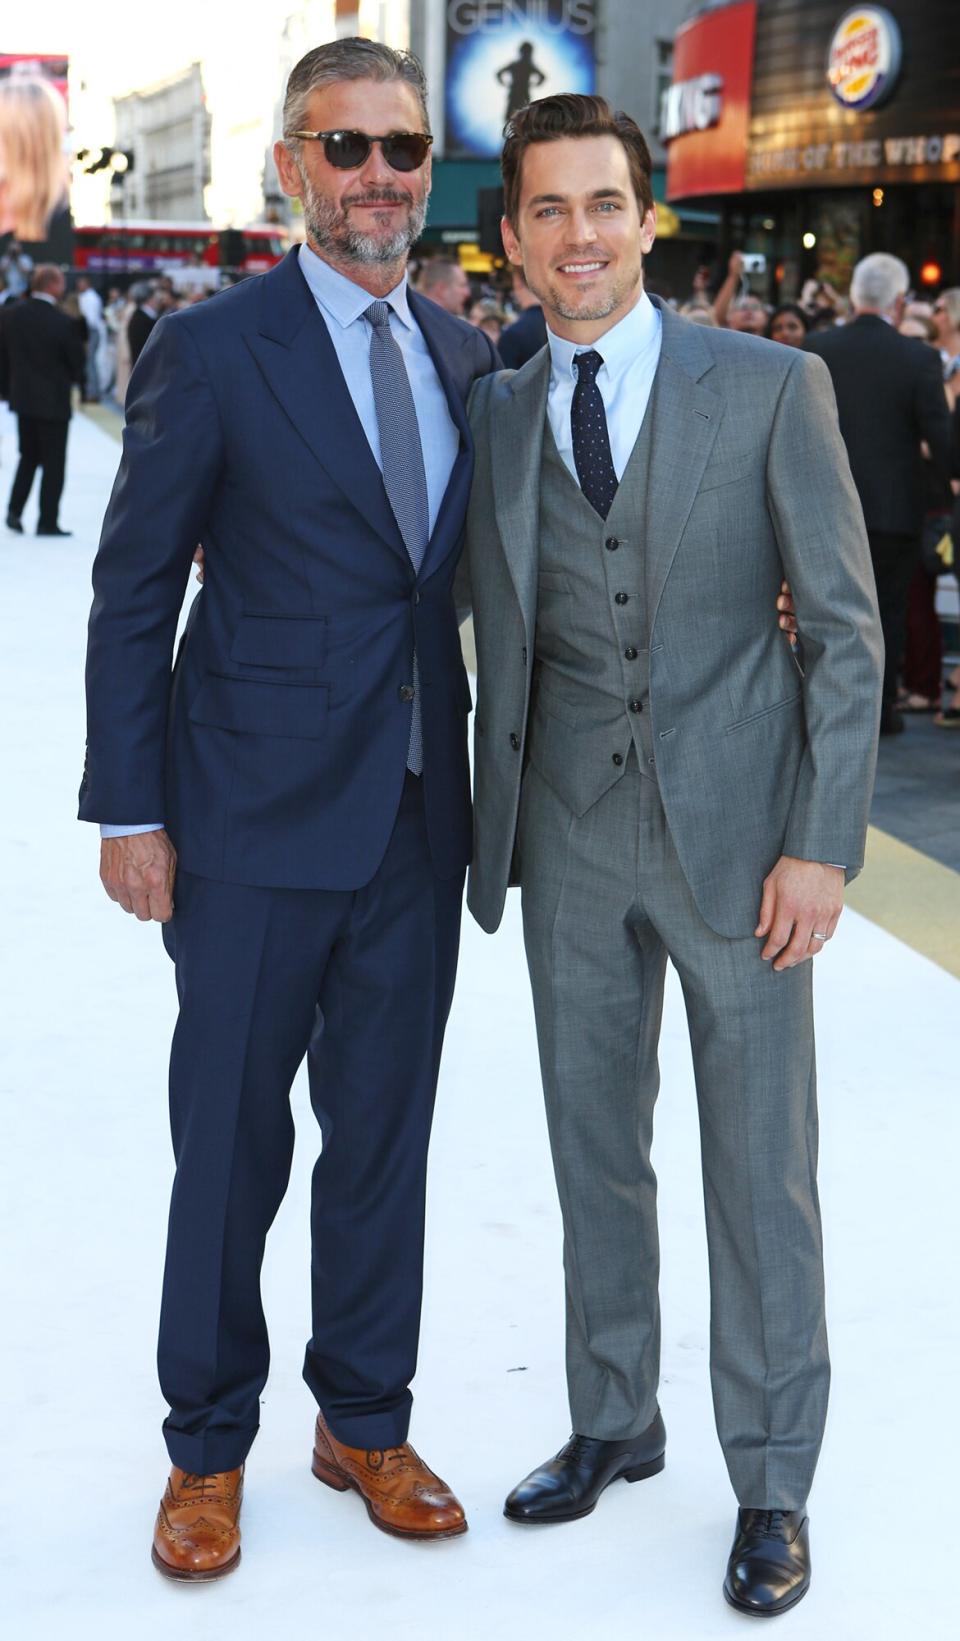 Simon Halls (L) and Matt Bomer attend the UK Premiere of "Magic Mike XXL" at the Vue West End on June 30, 2015 in London, England